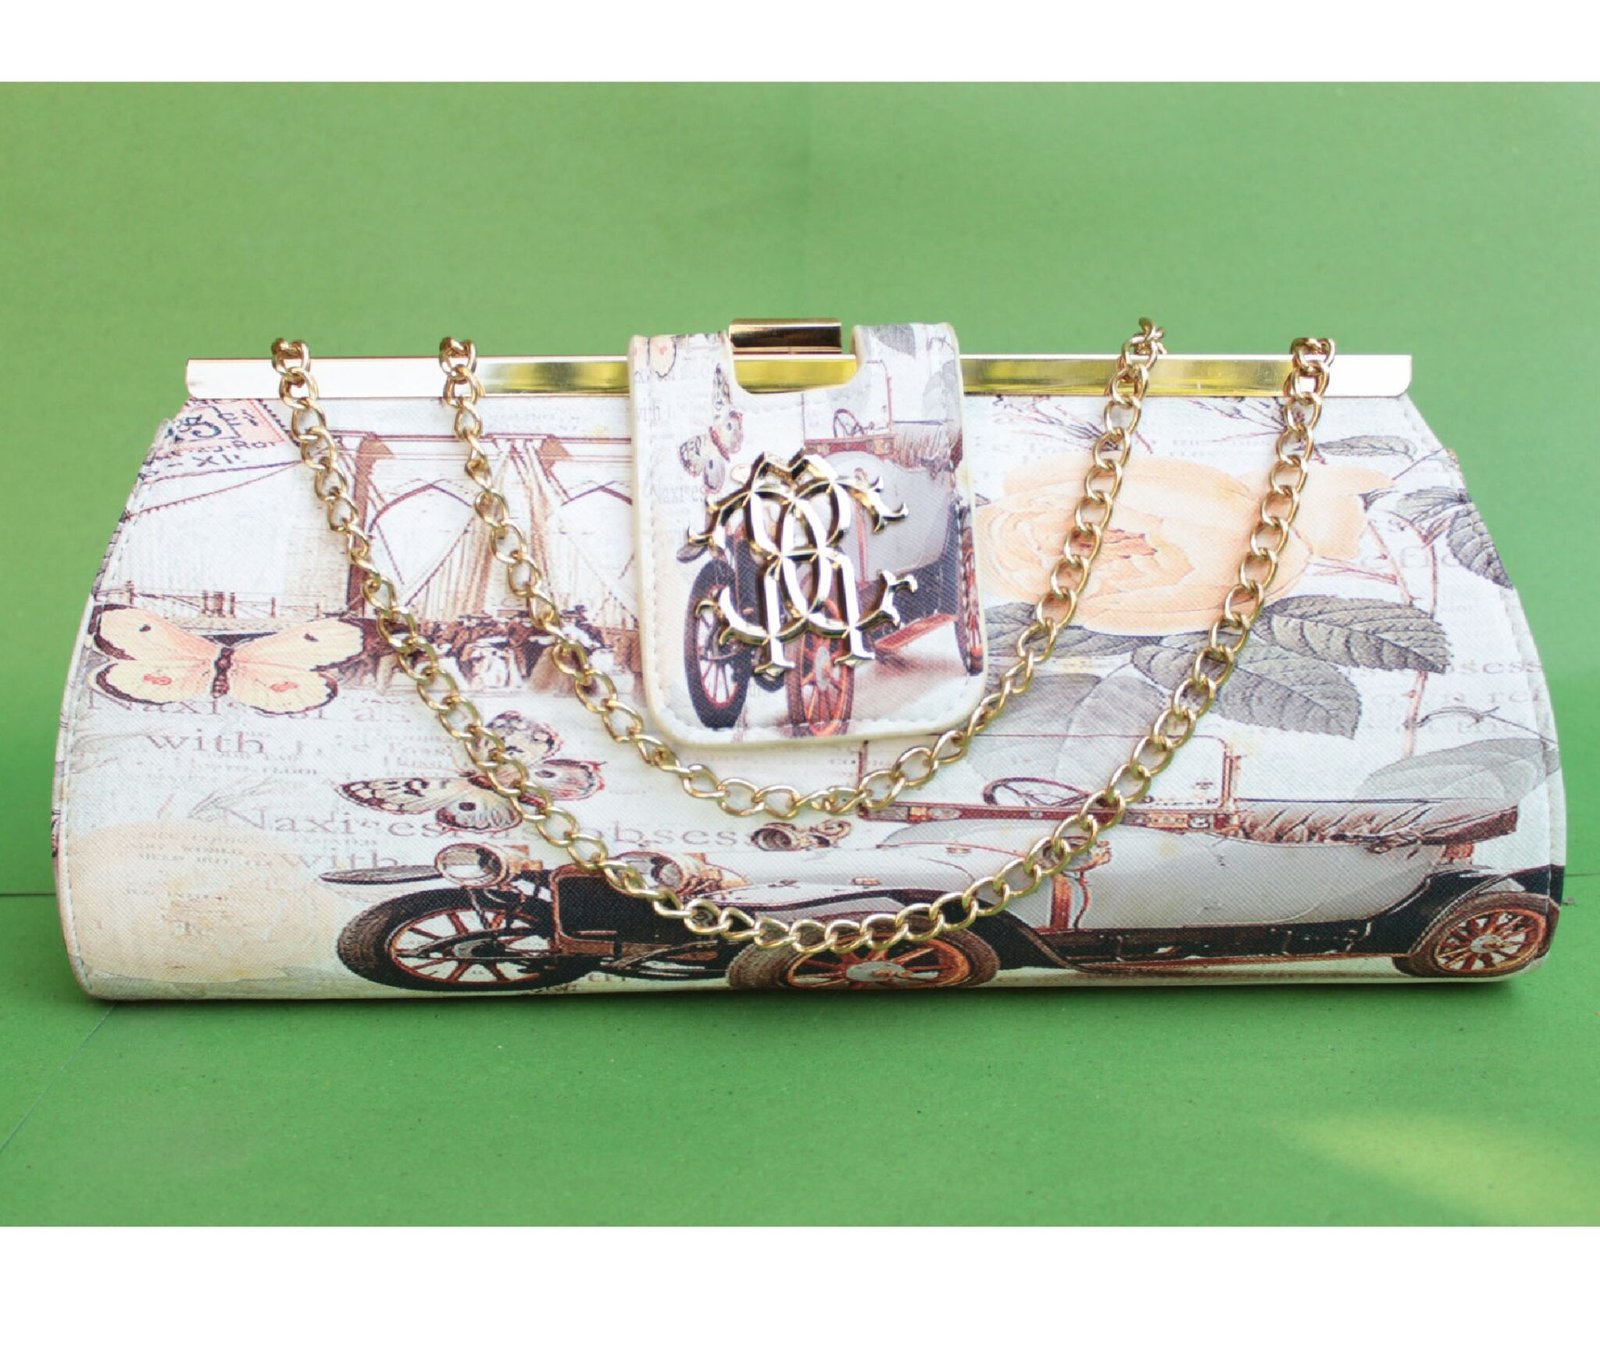 Galorze: Enchantment Obsess is crossbody bag with long golden chain.